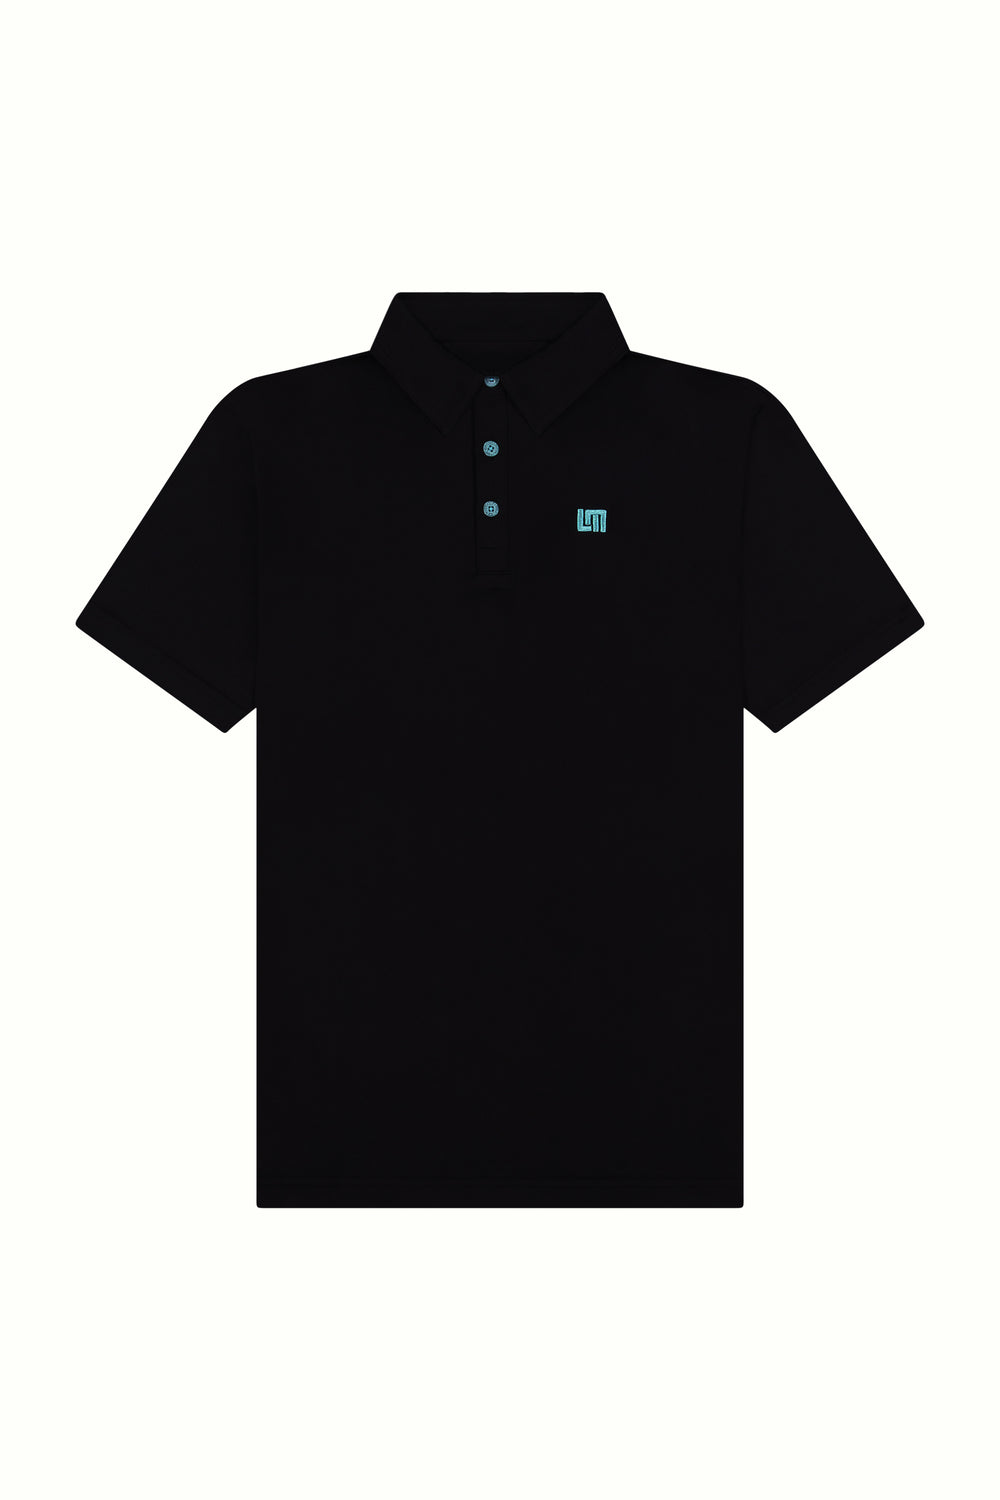 black polo with blue stitching